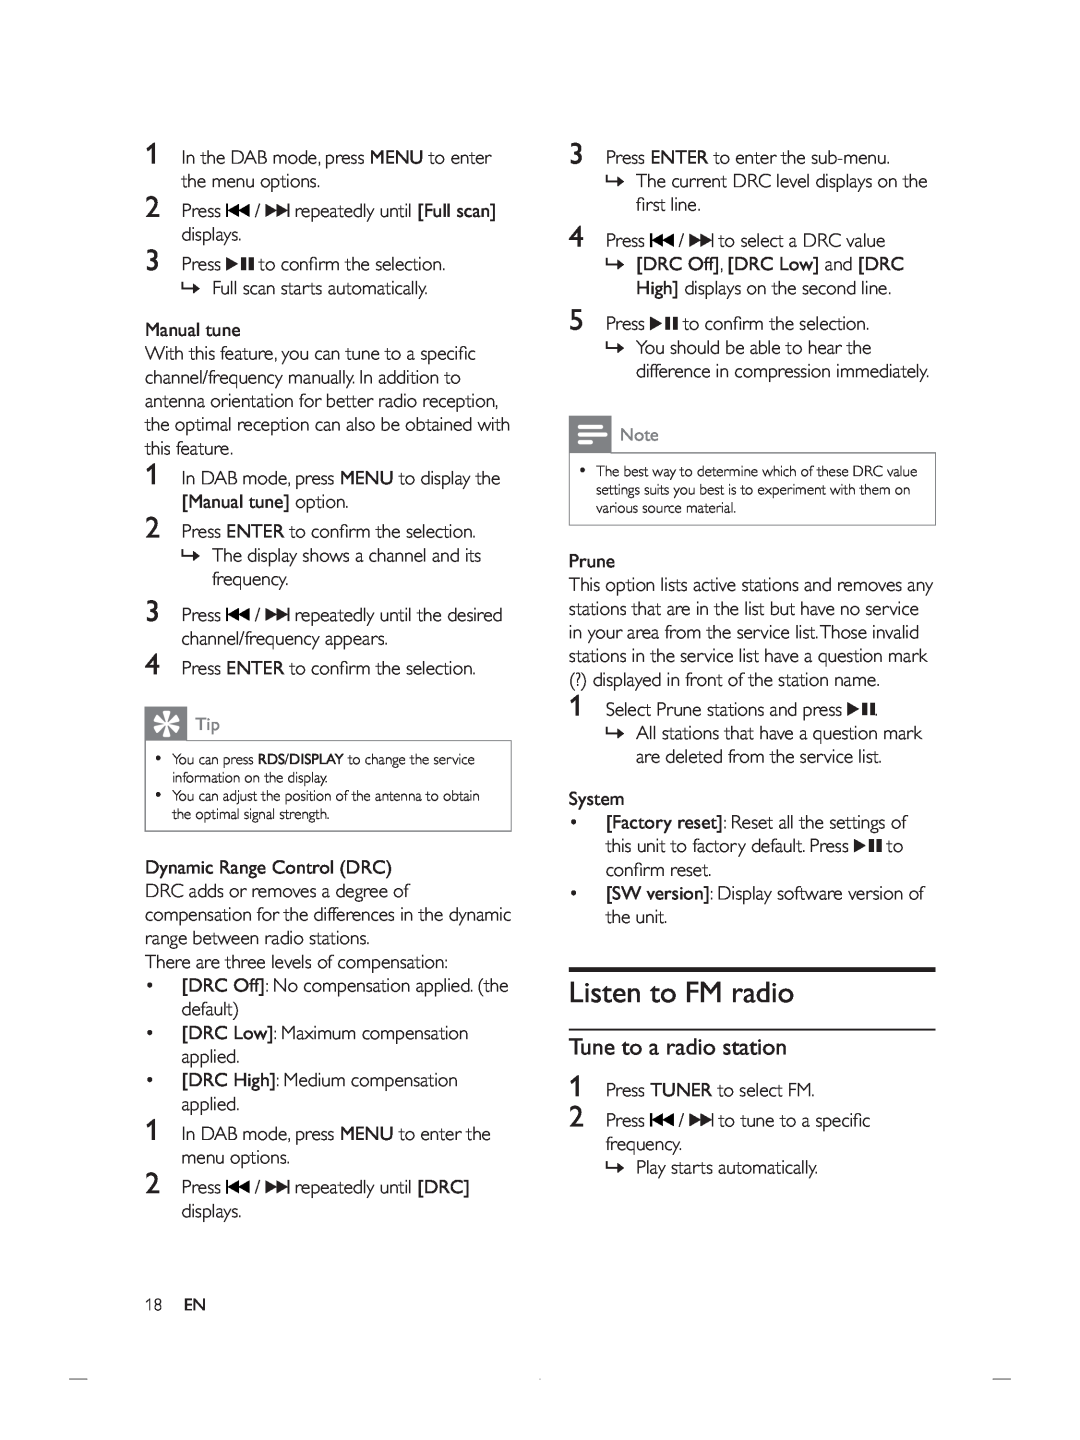 Philips DCB852 user manual Listen to FM radio, Tune to a radio station 